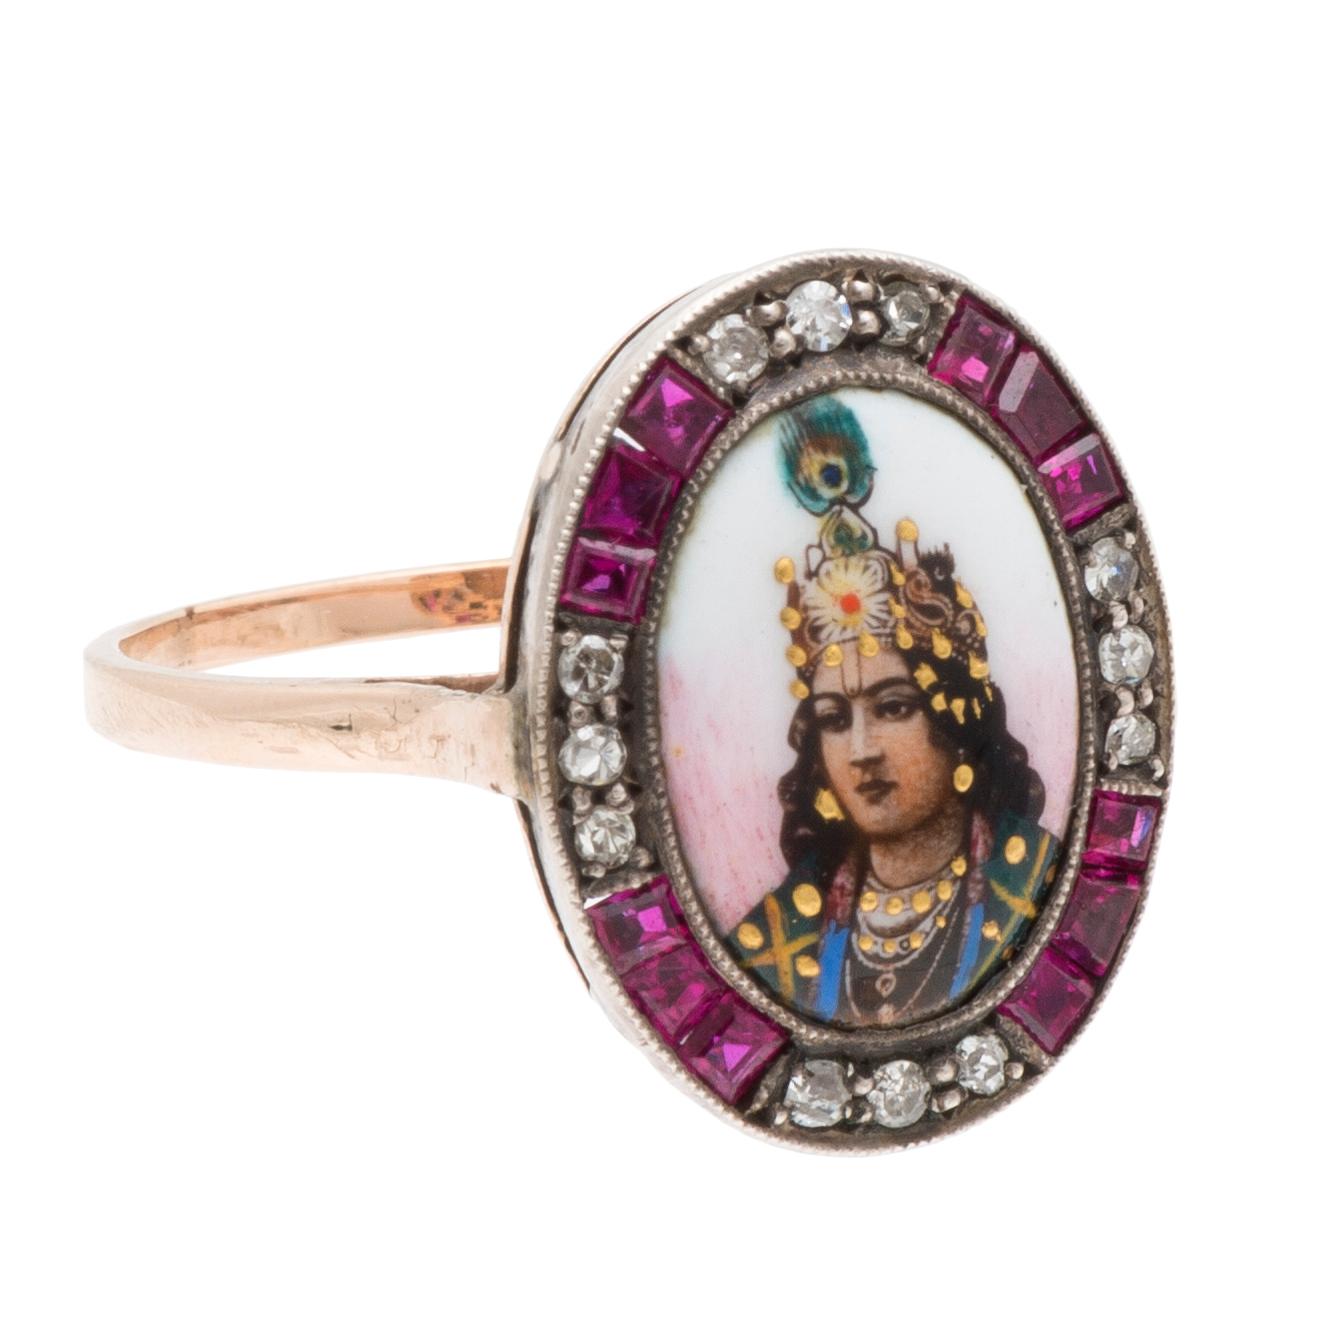 Ring with the God Krishna
India, probably Calcutta, c. 1900-1915
Rose gold, platinum, rubies and diamonds
Weight 3.1 gr., US size 7, UK size O

This delicate ring is composed of a rose gold hoop with square section which forks at the ends to support